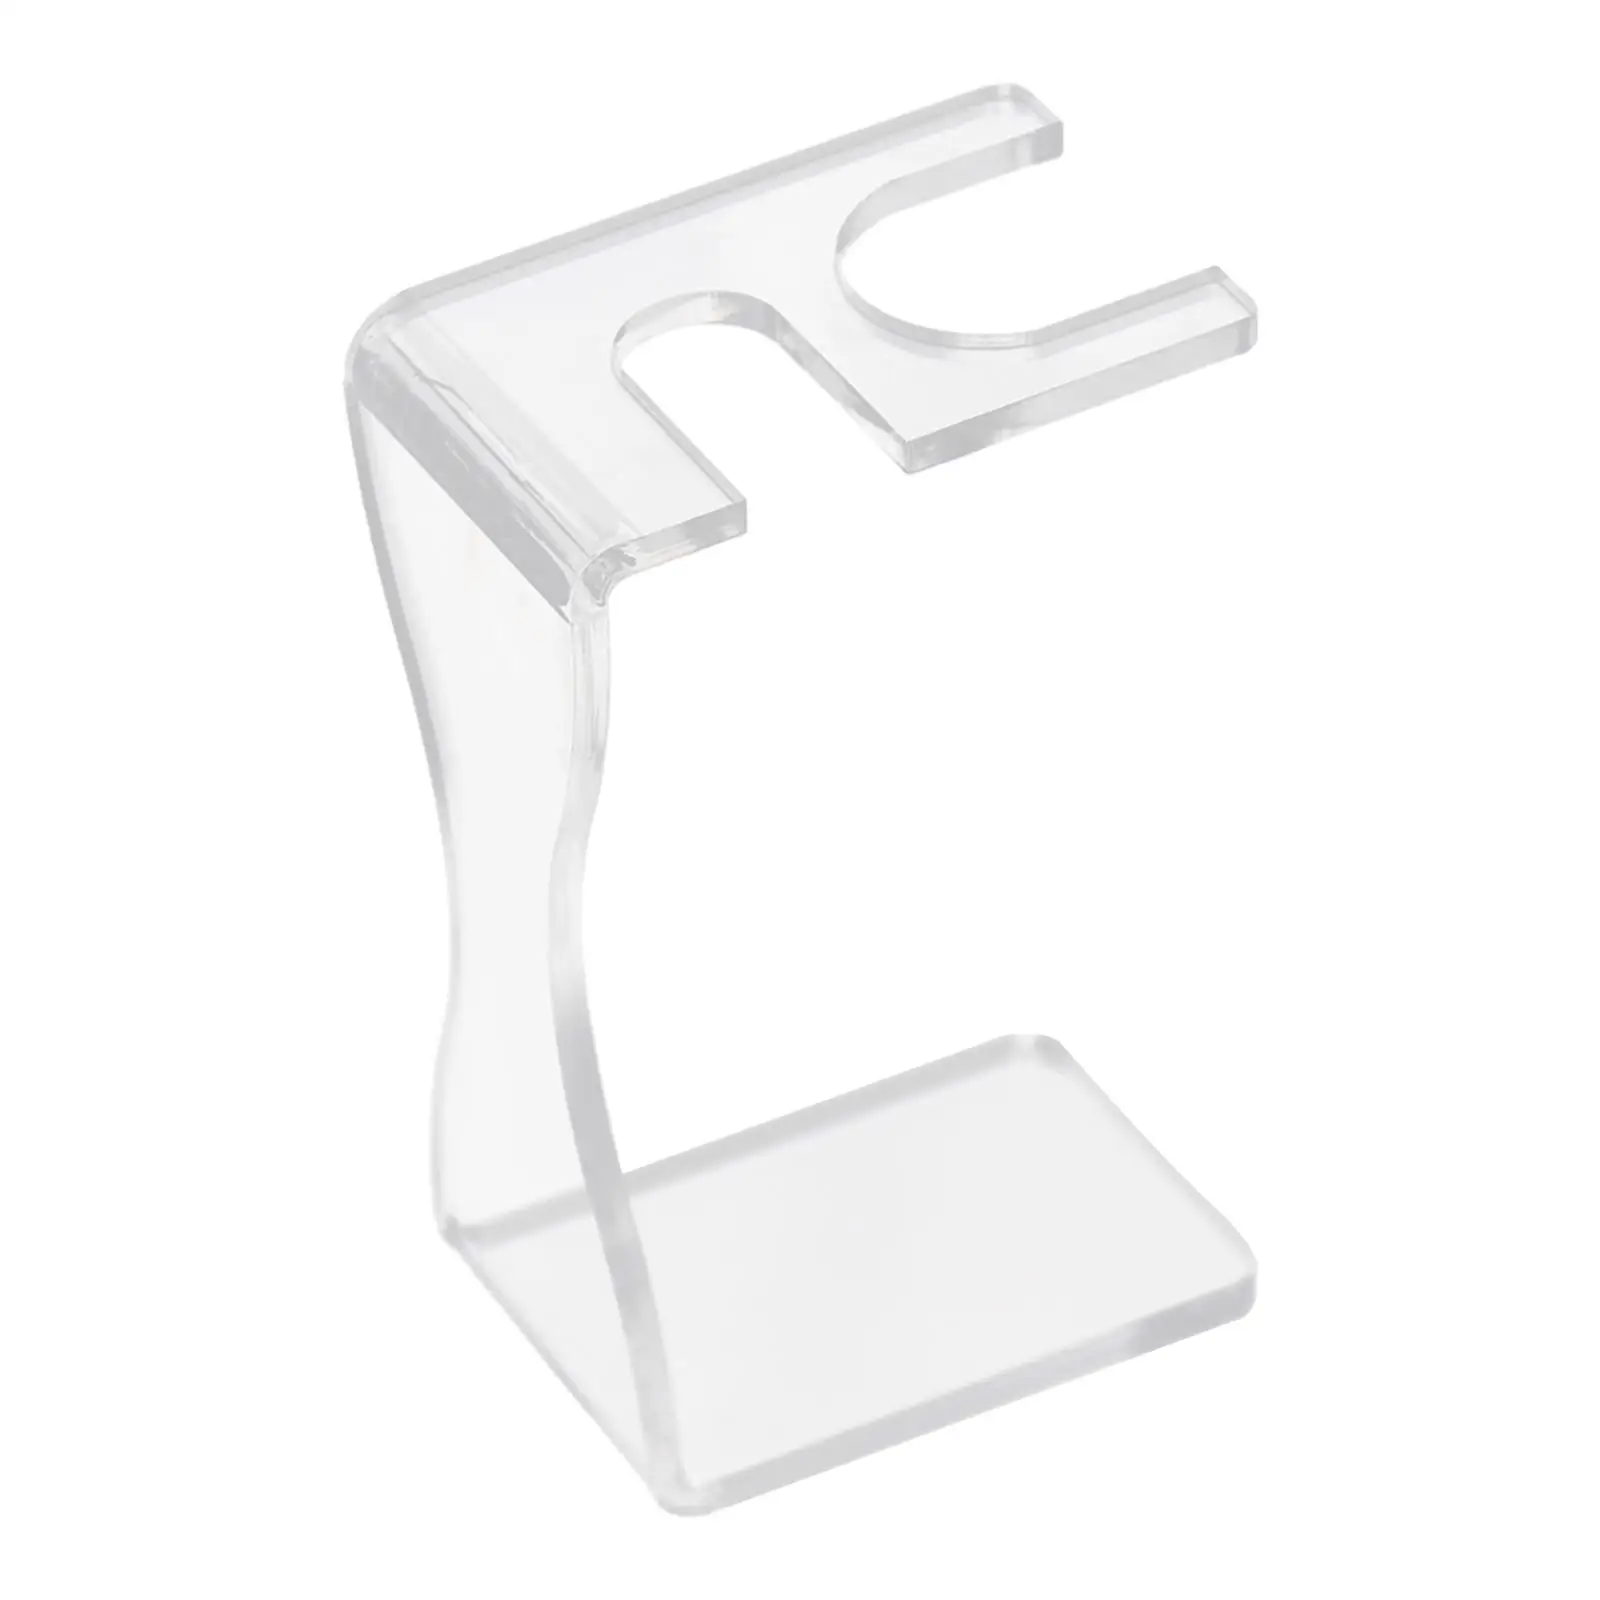 Manual Shaver Stand Holder Rack Transparent for Protecting and Drying Shaver